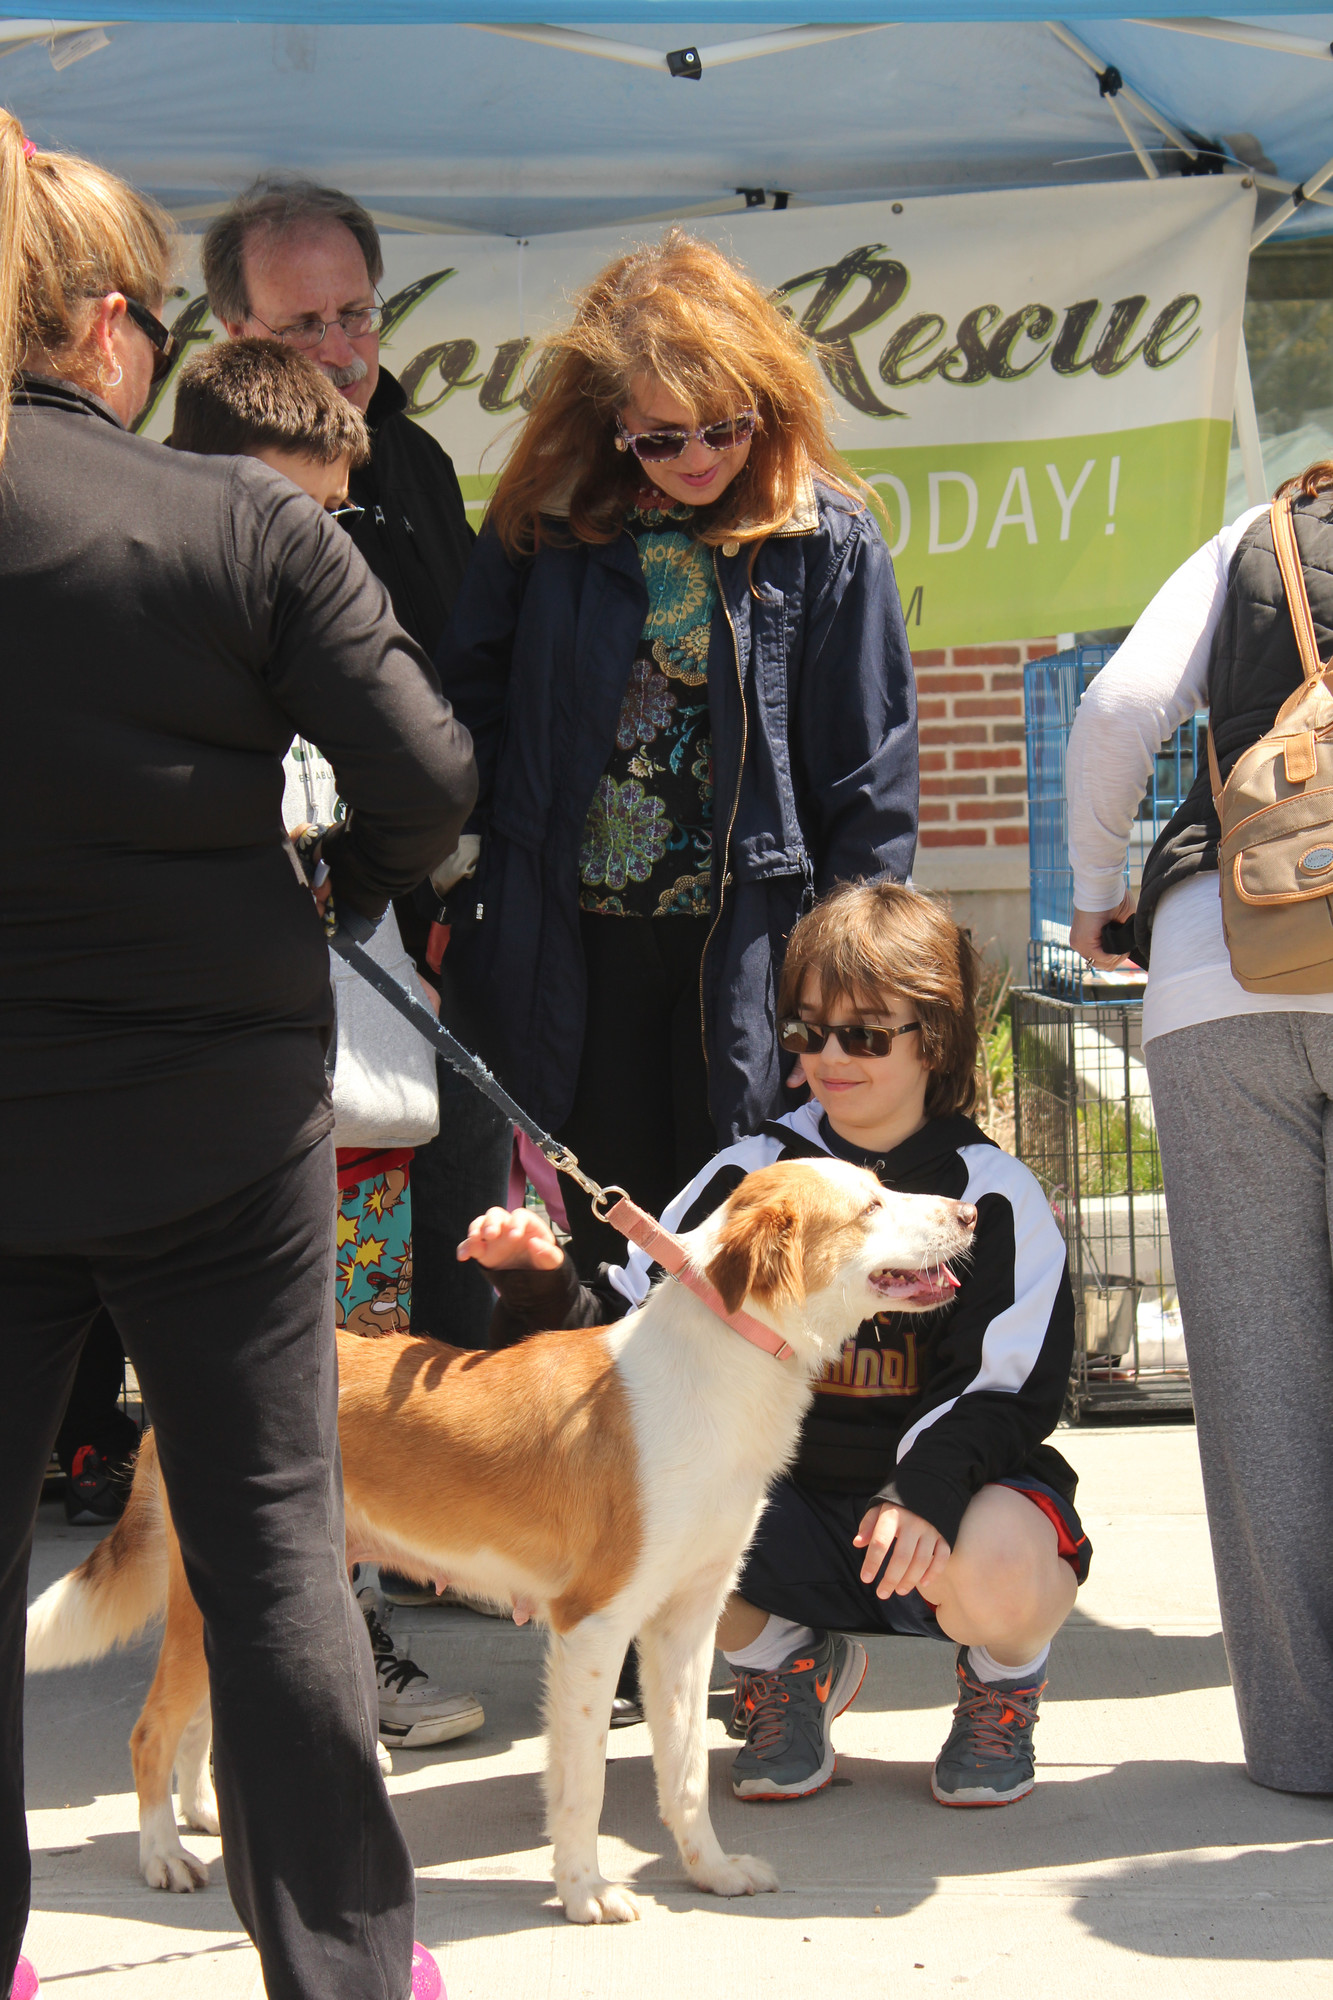 Jeremy Feder, 11, and his mother, Laura Koss-Feder, greeted one of the rescue dogs up for adoption.